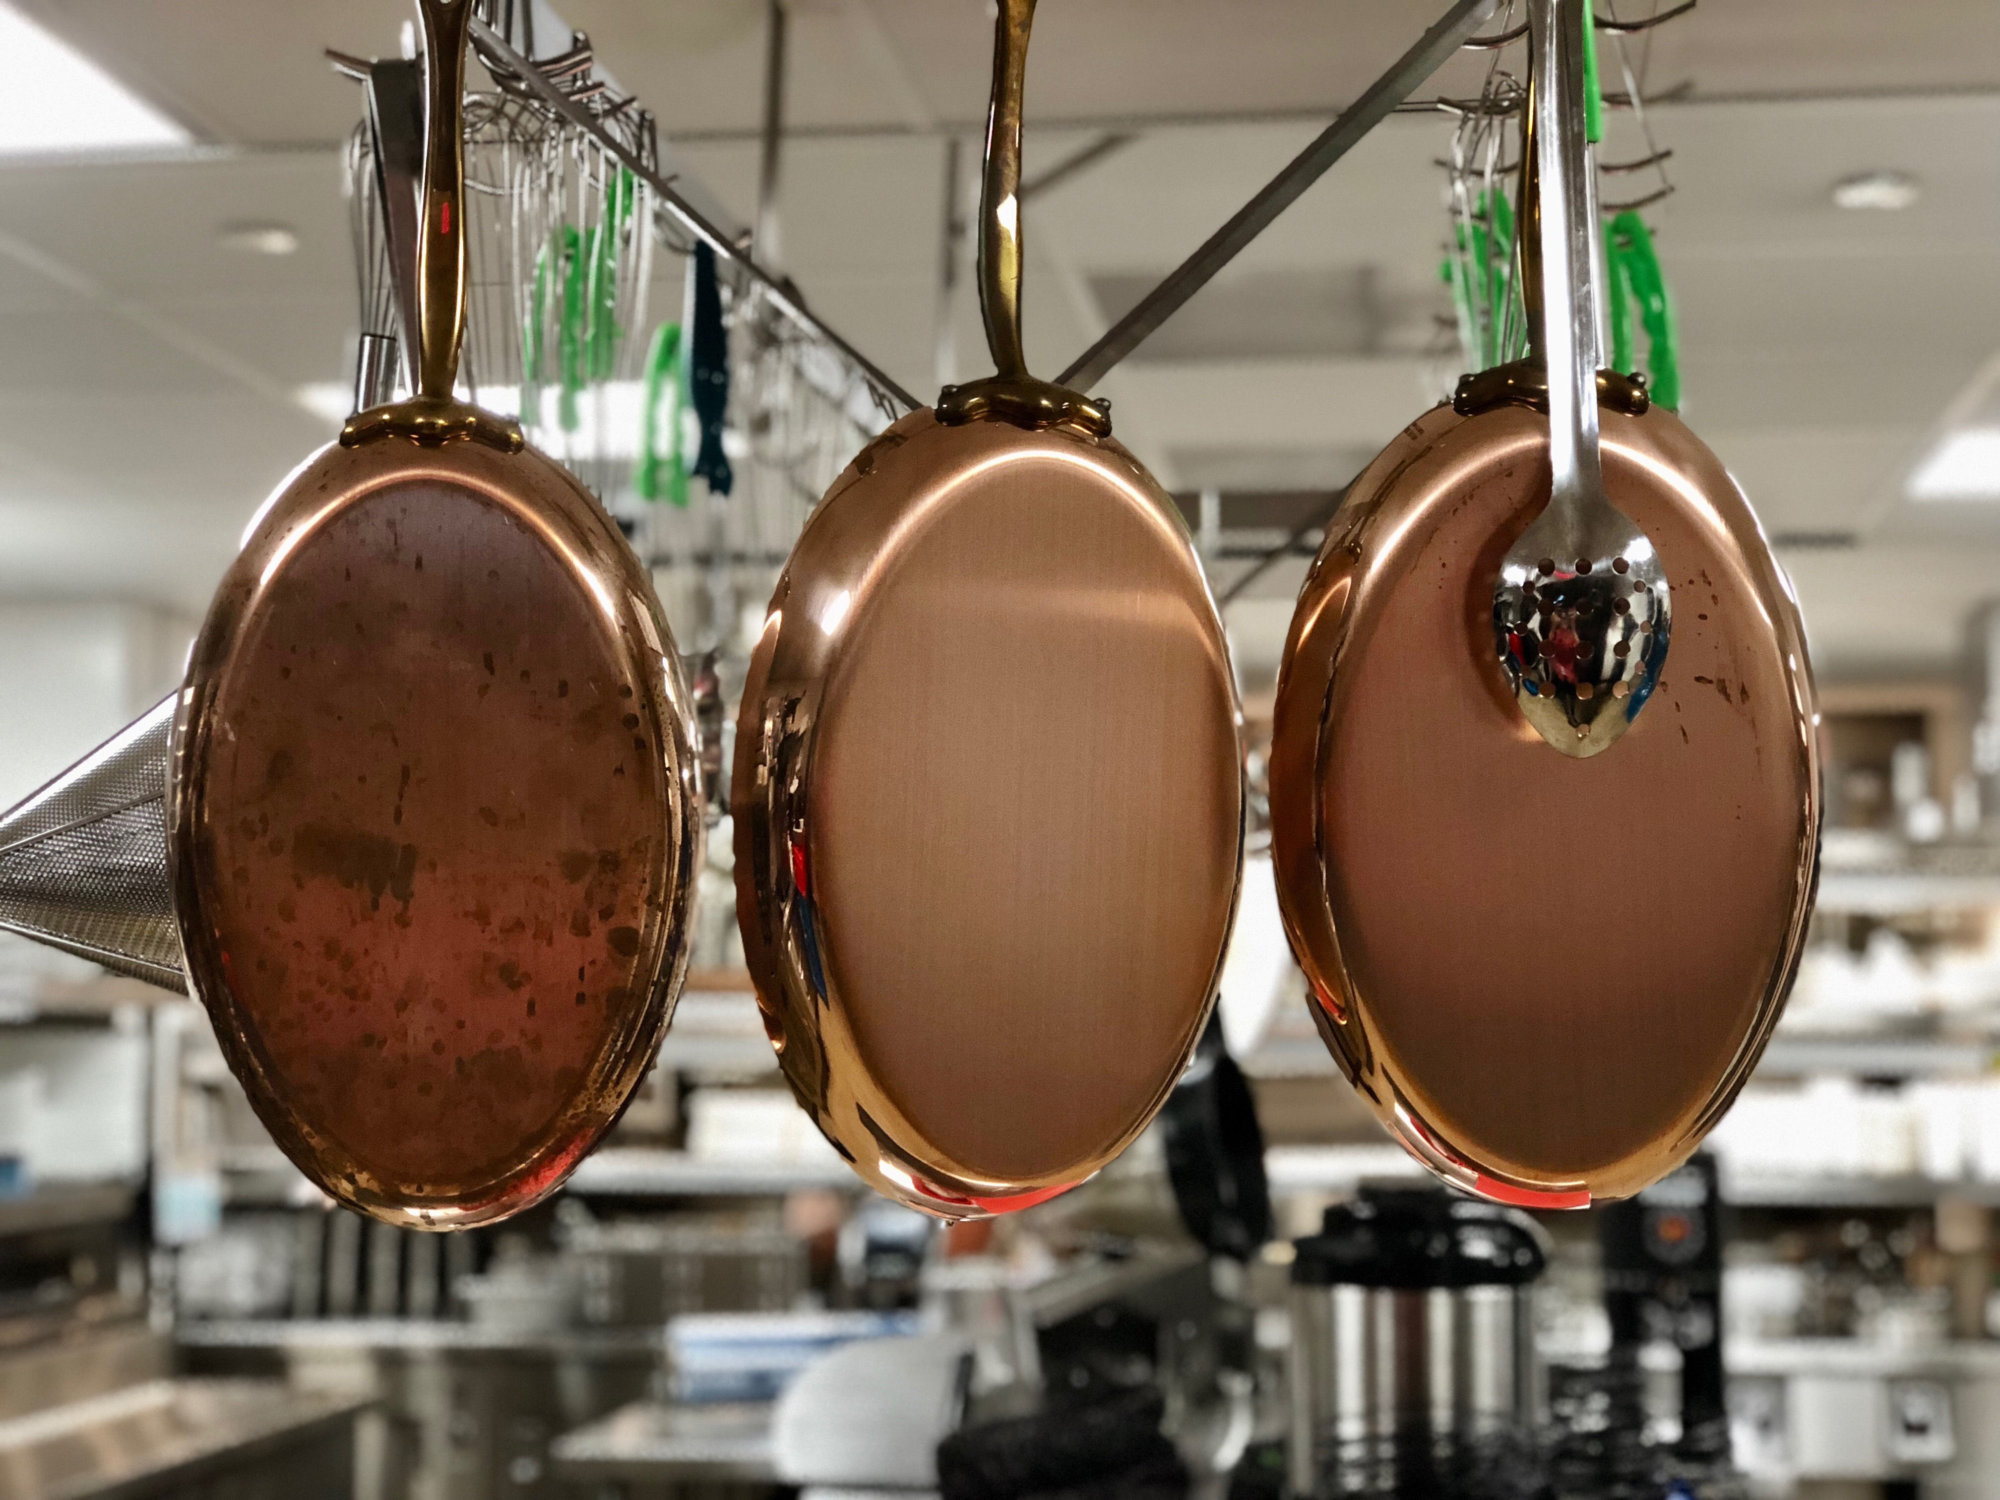 Gleaming copper-bottomed pots in the Annapolis Yacht Club kitchen. (WTOP/Kate Ryan)